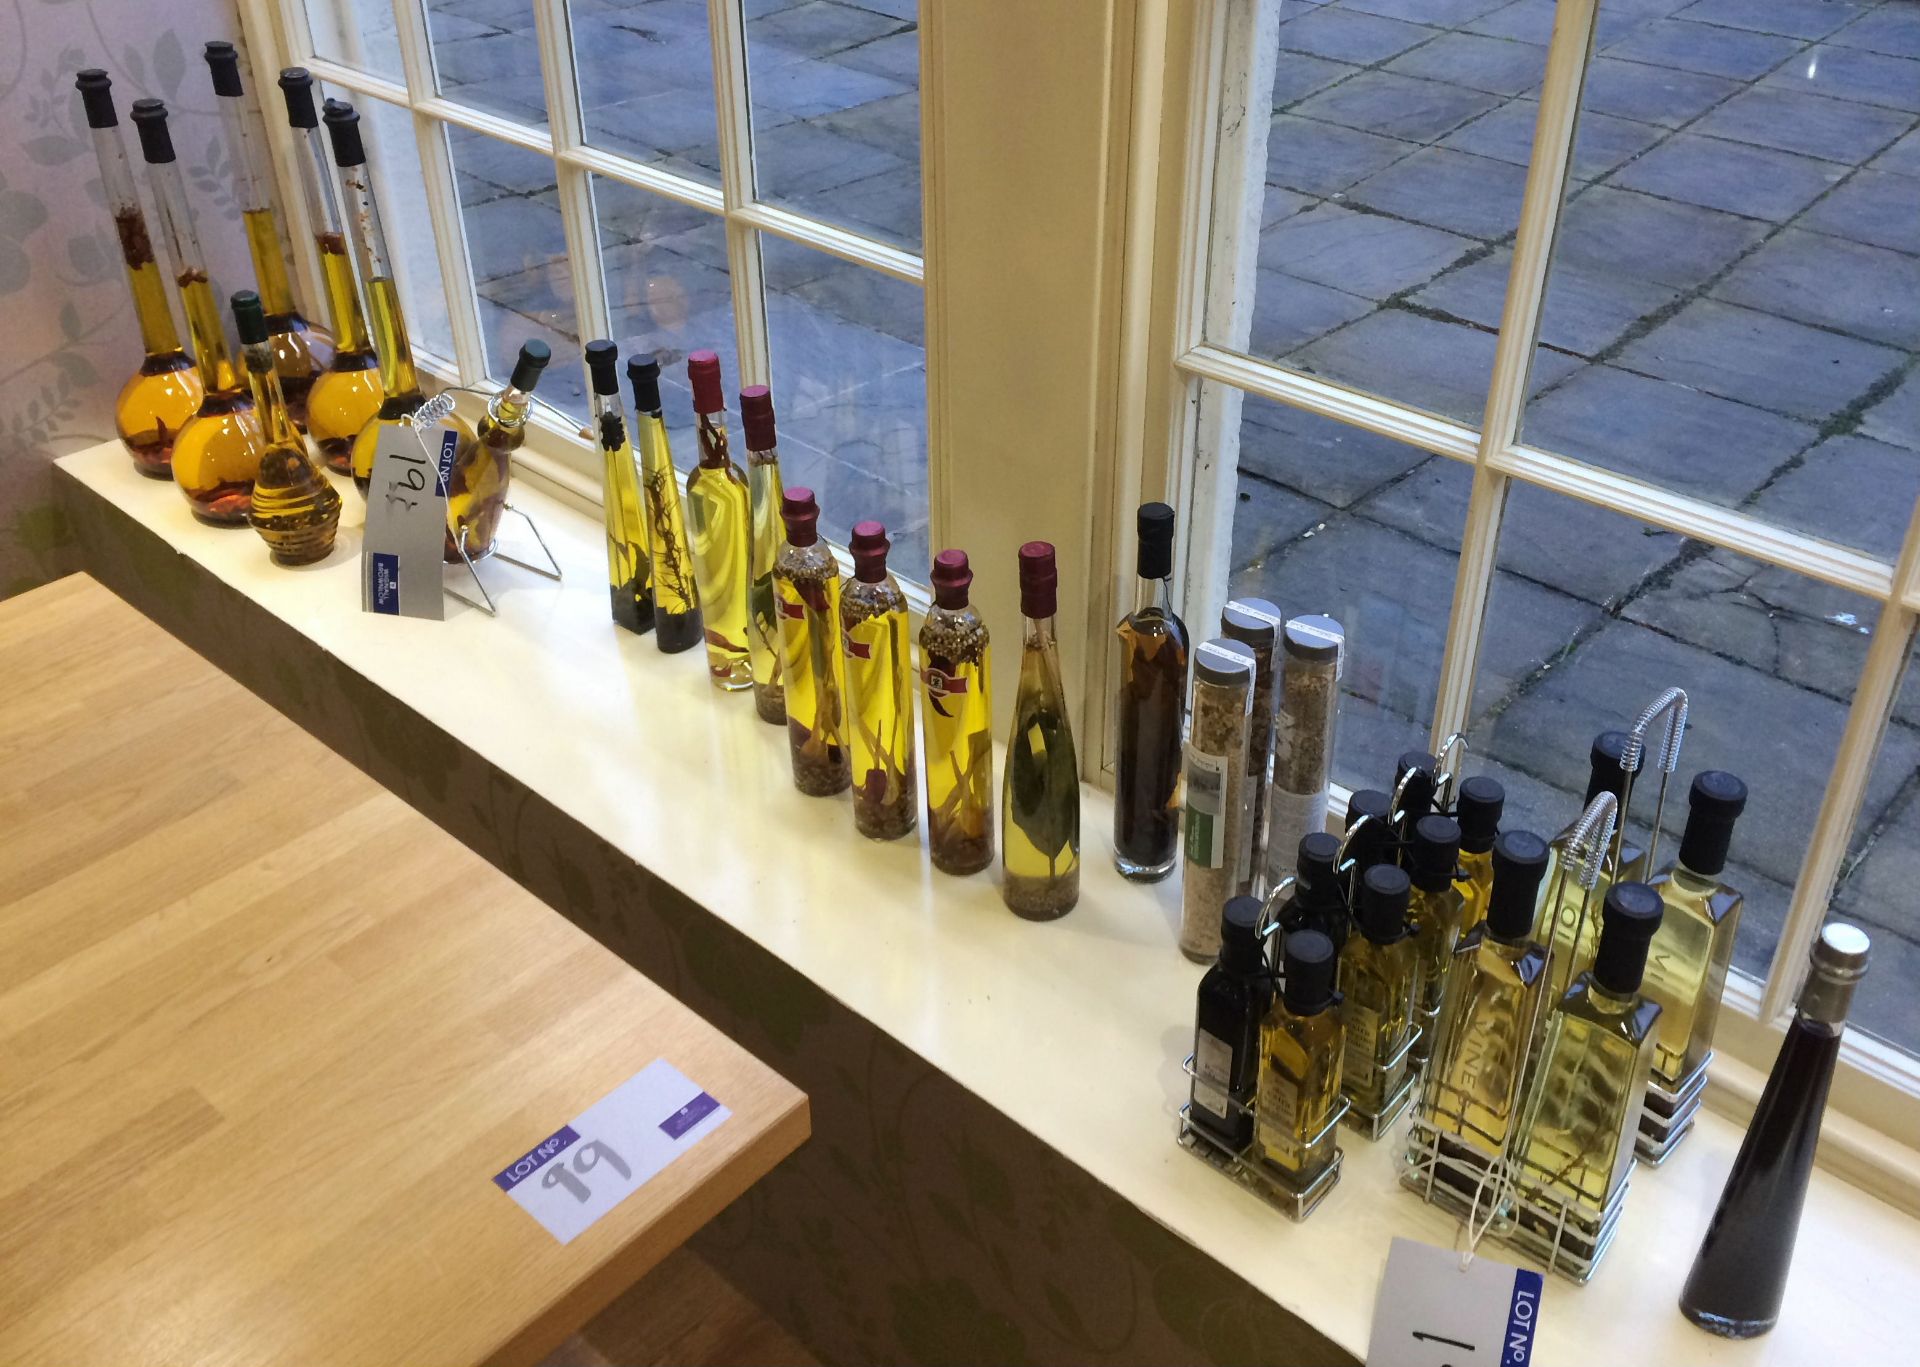 16 Assorted Display Bottles of Flavoured Olive Oil; 3 Matching Sets of Olive Oil and Balsamic